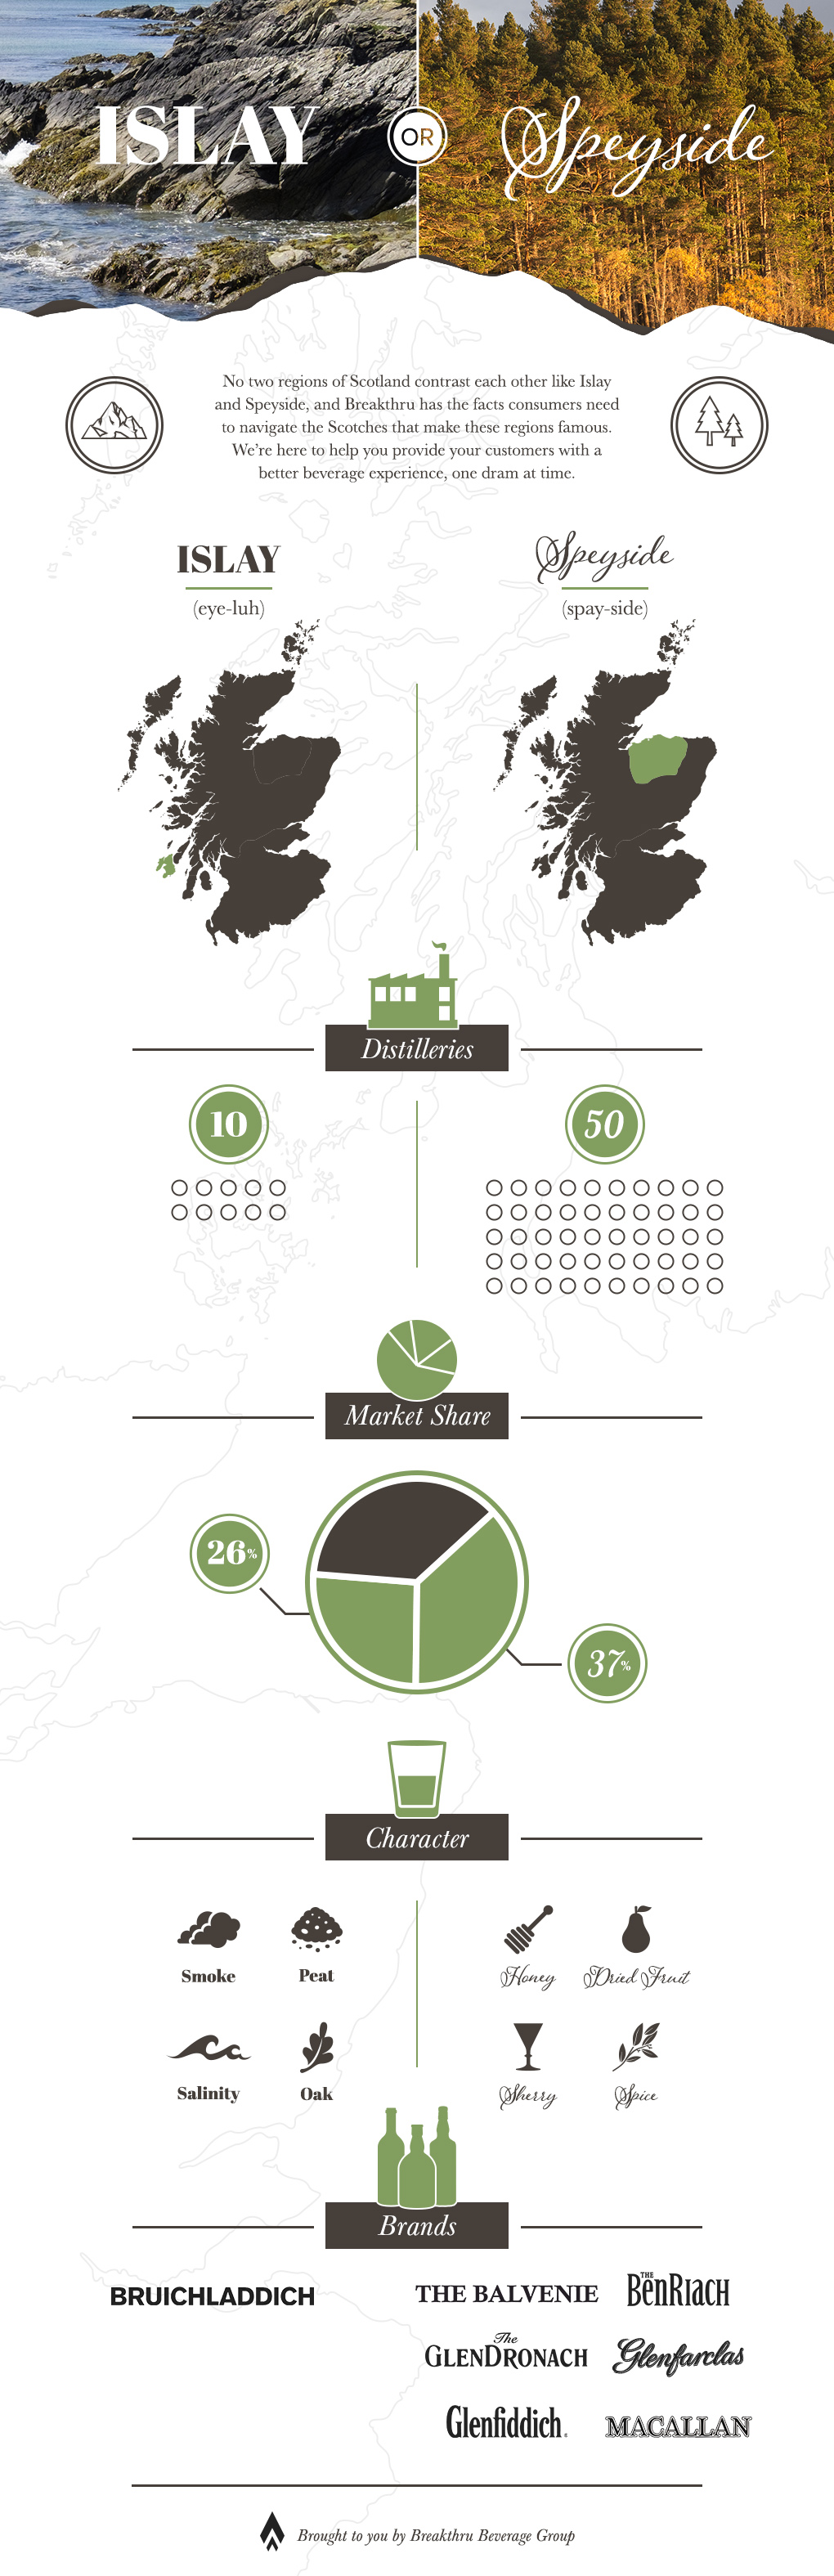 PA - Islay or Speyside Infographic